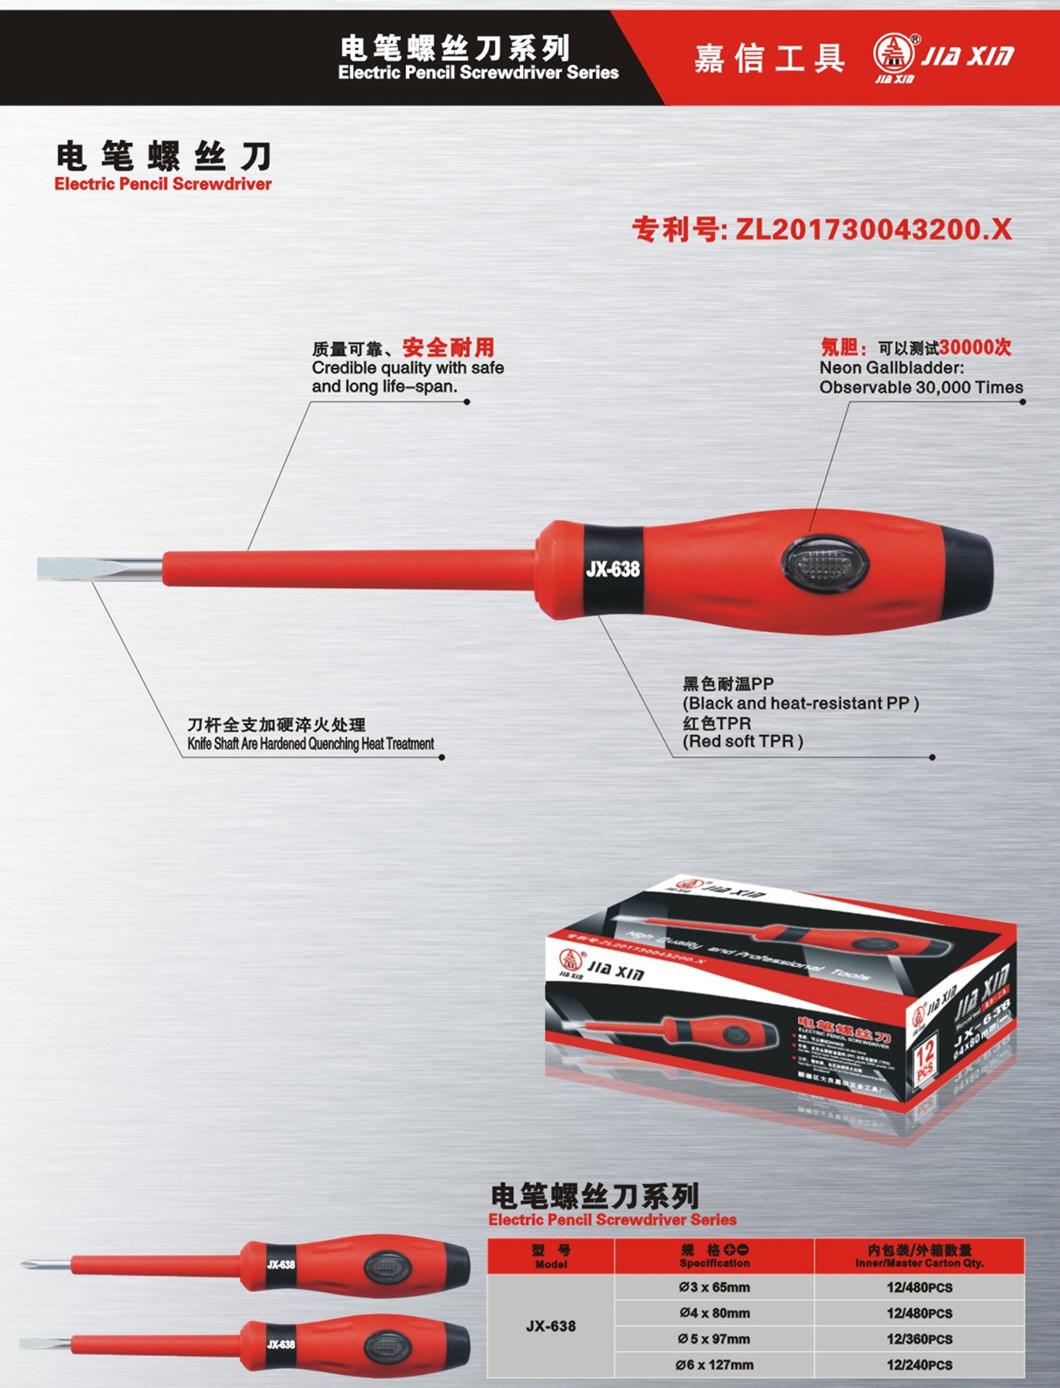 5mm*97mm Dual Purpose Screwdriver/Test Pencil CRV Slotted Screwdriver with Magnetic